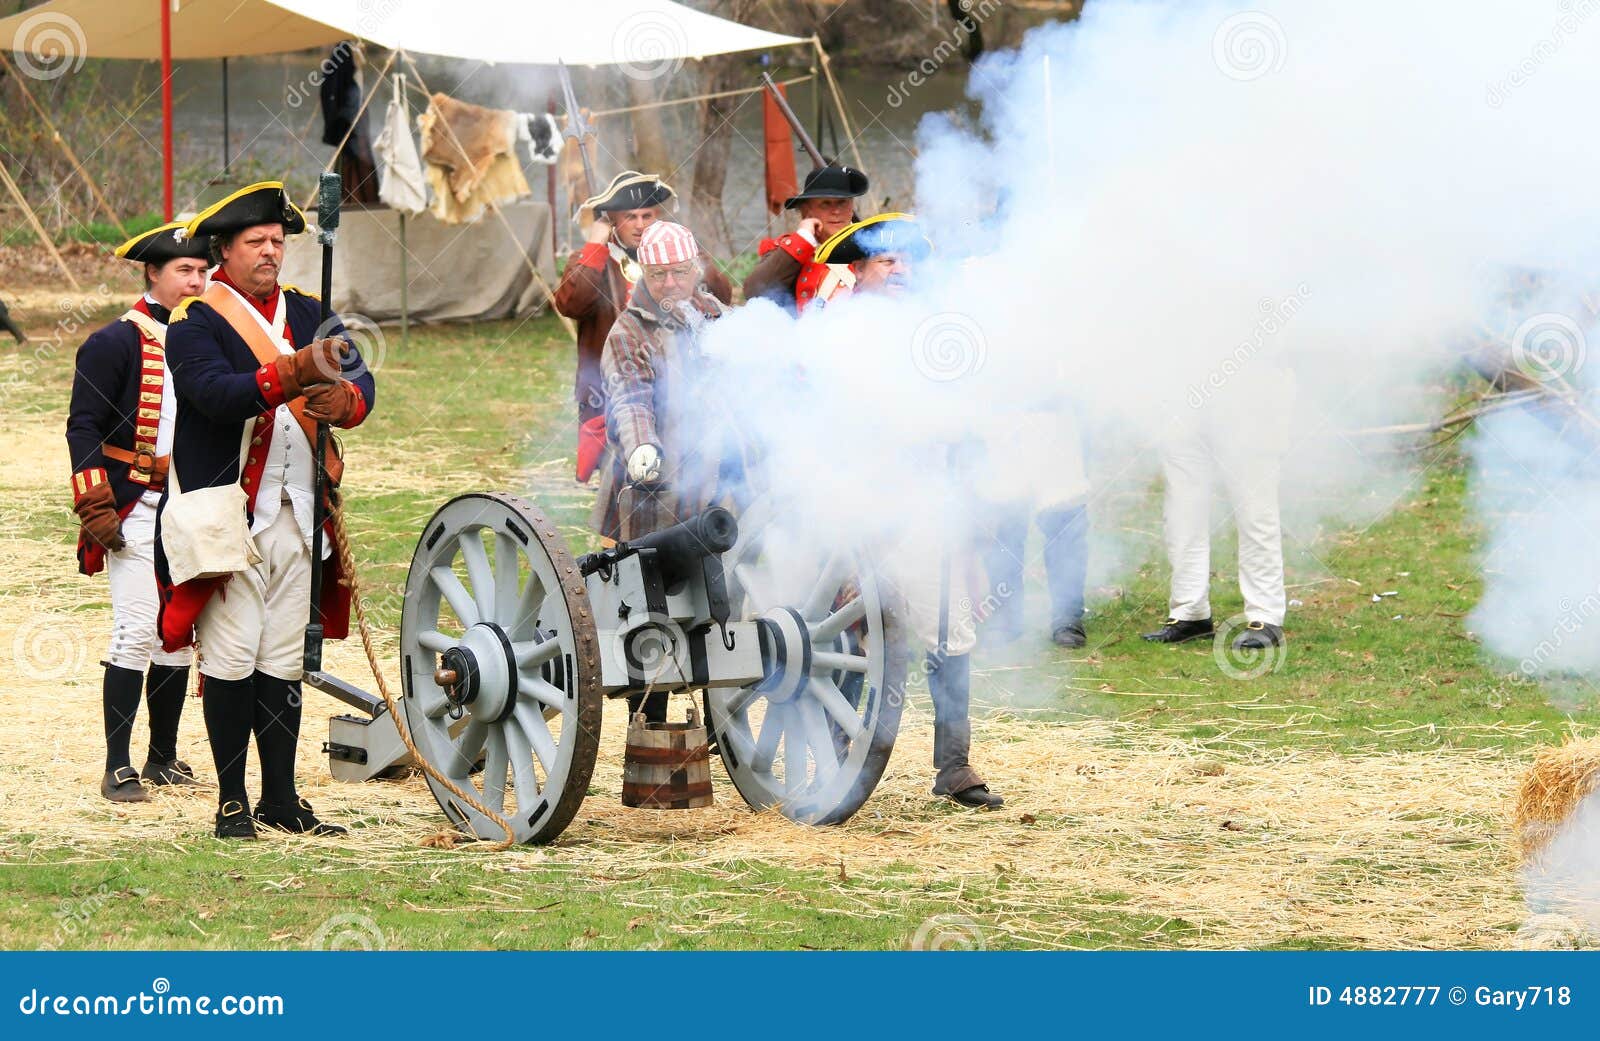 Battle of Bound Brook re-enactment in New Jersey, April 12-13, 2008